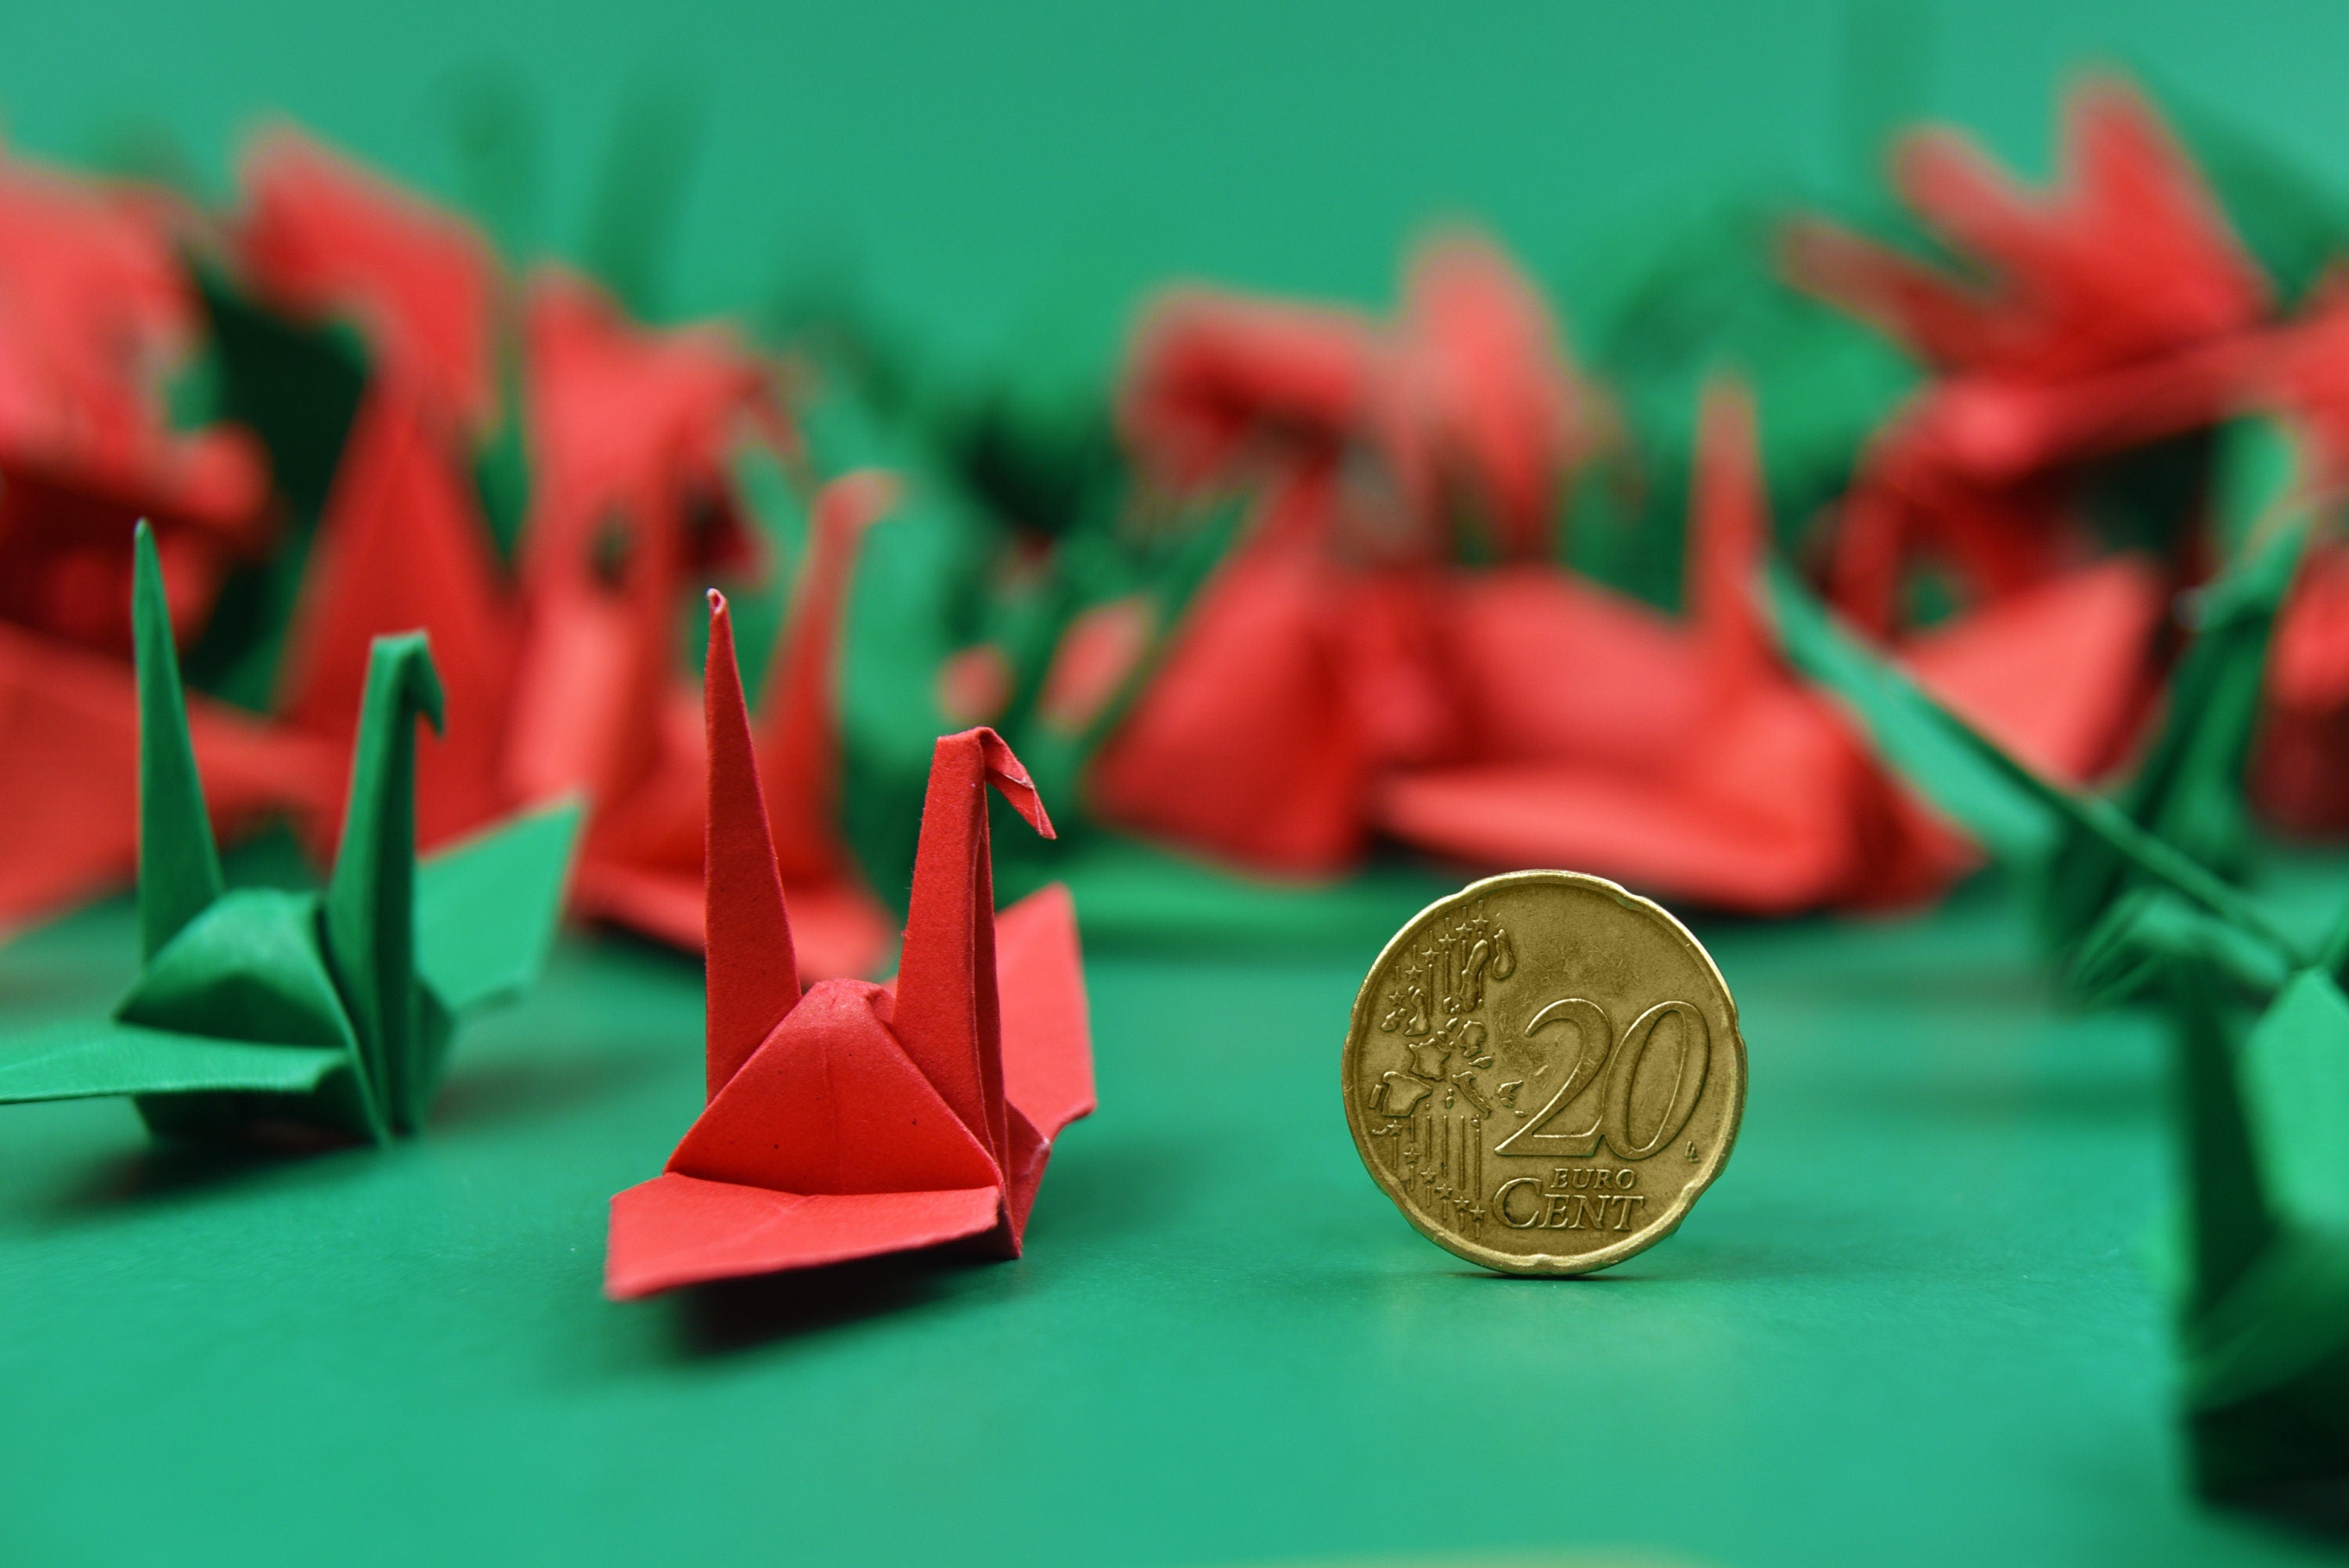 1000 Origami Paper Crane Red Green 3x3 inches (7.5 cm) Origami crane Ornament, Wedding Gift, Christmas